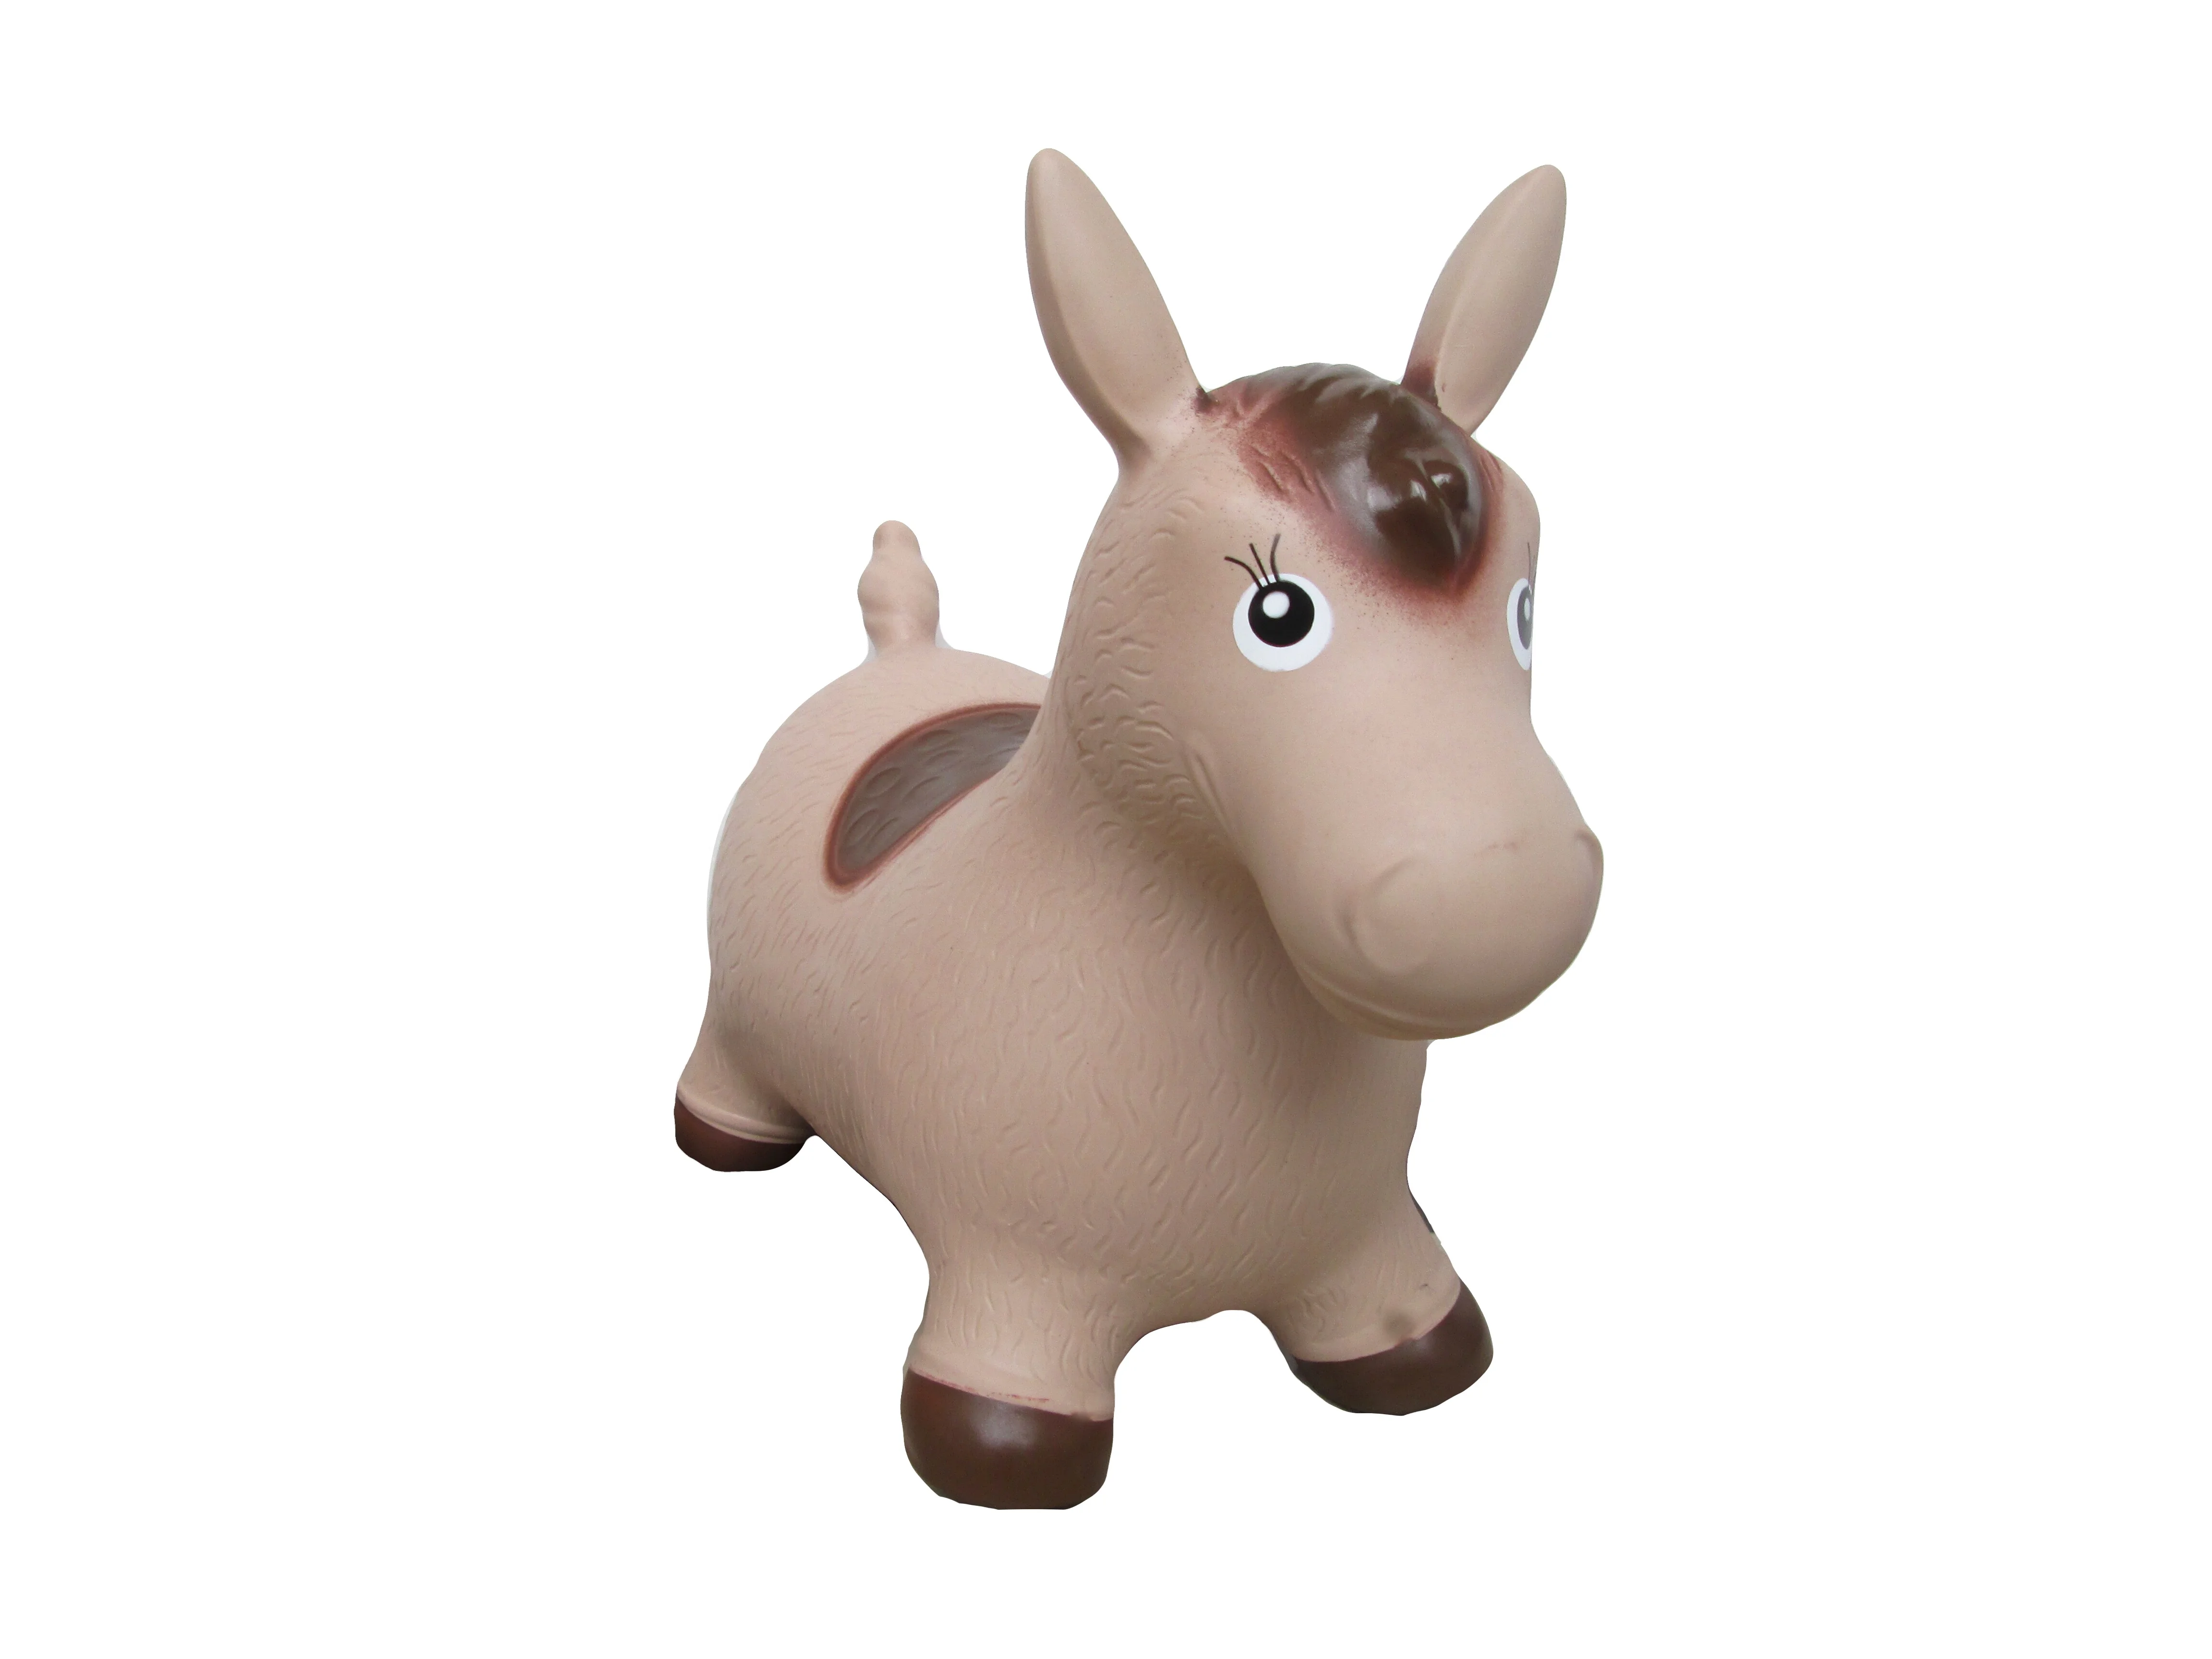 
OEM design Hot sales brown Donkey Inflatable Jumping animal for kids 